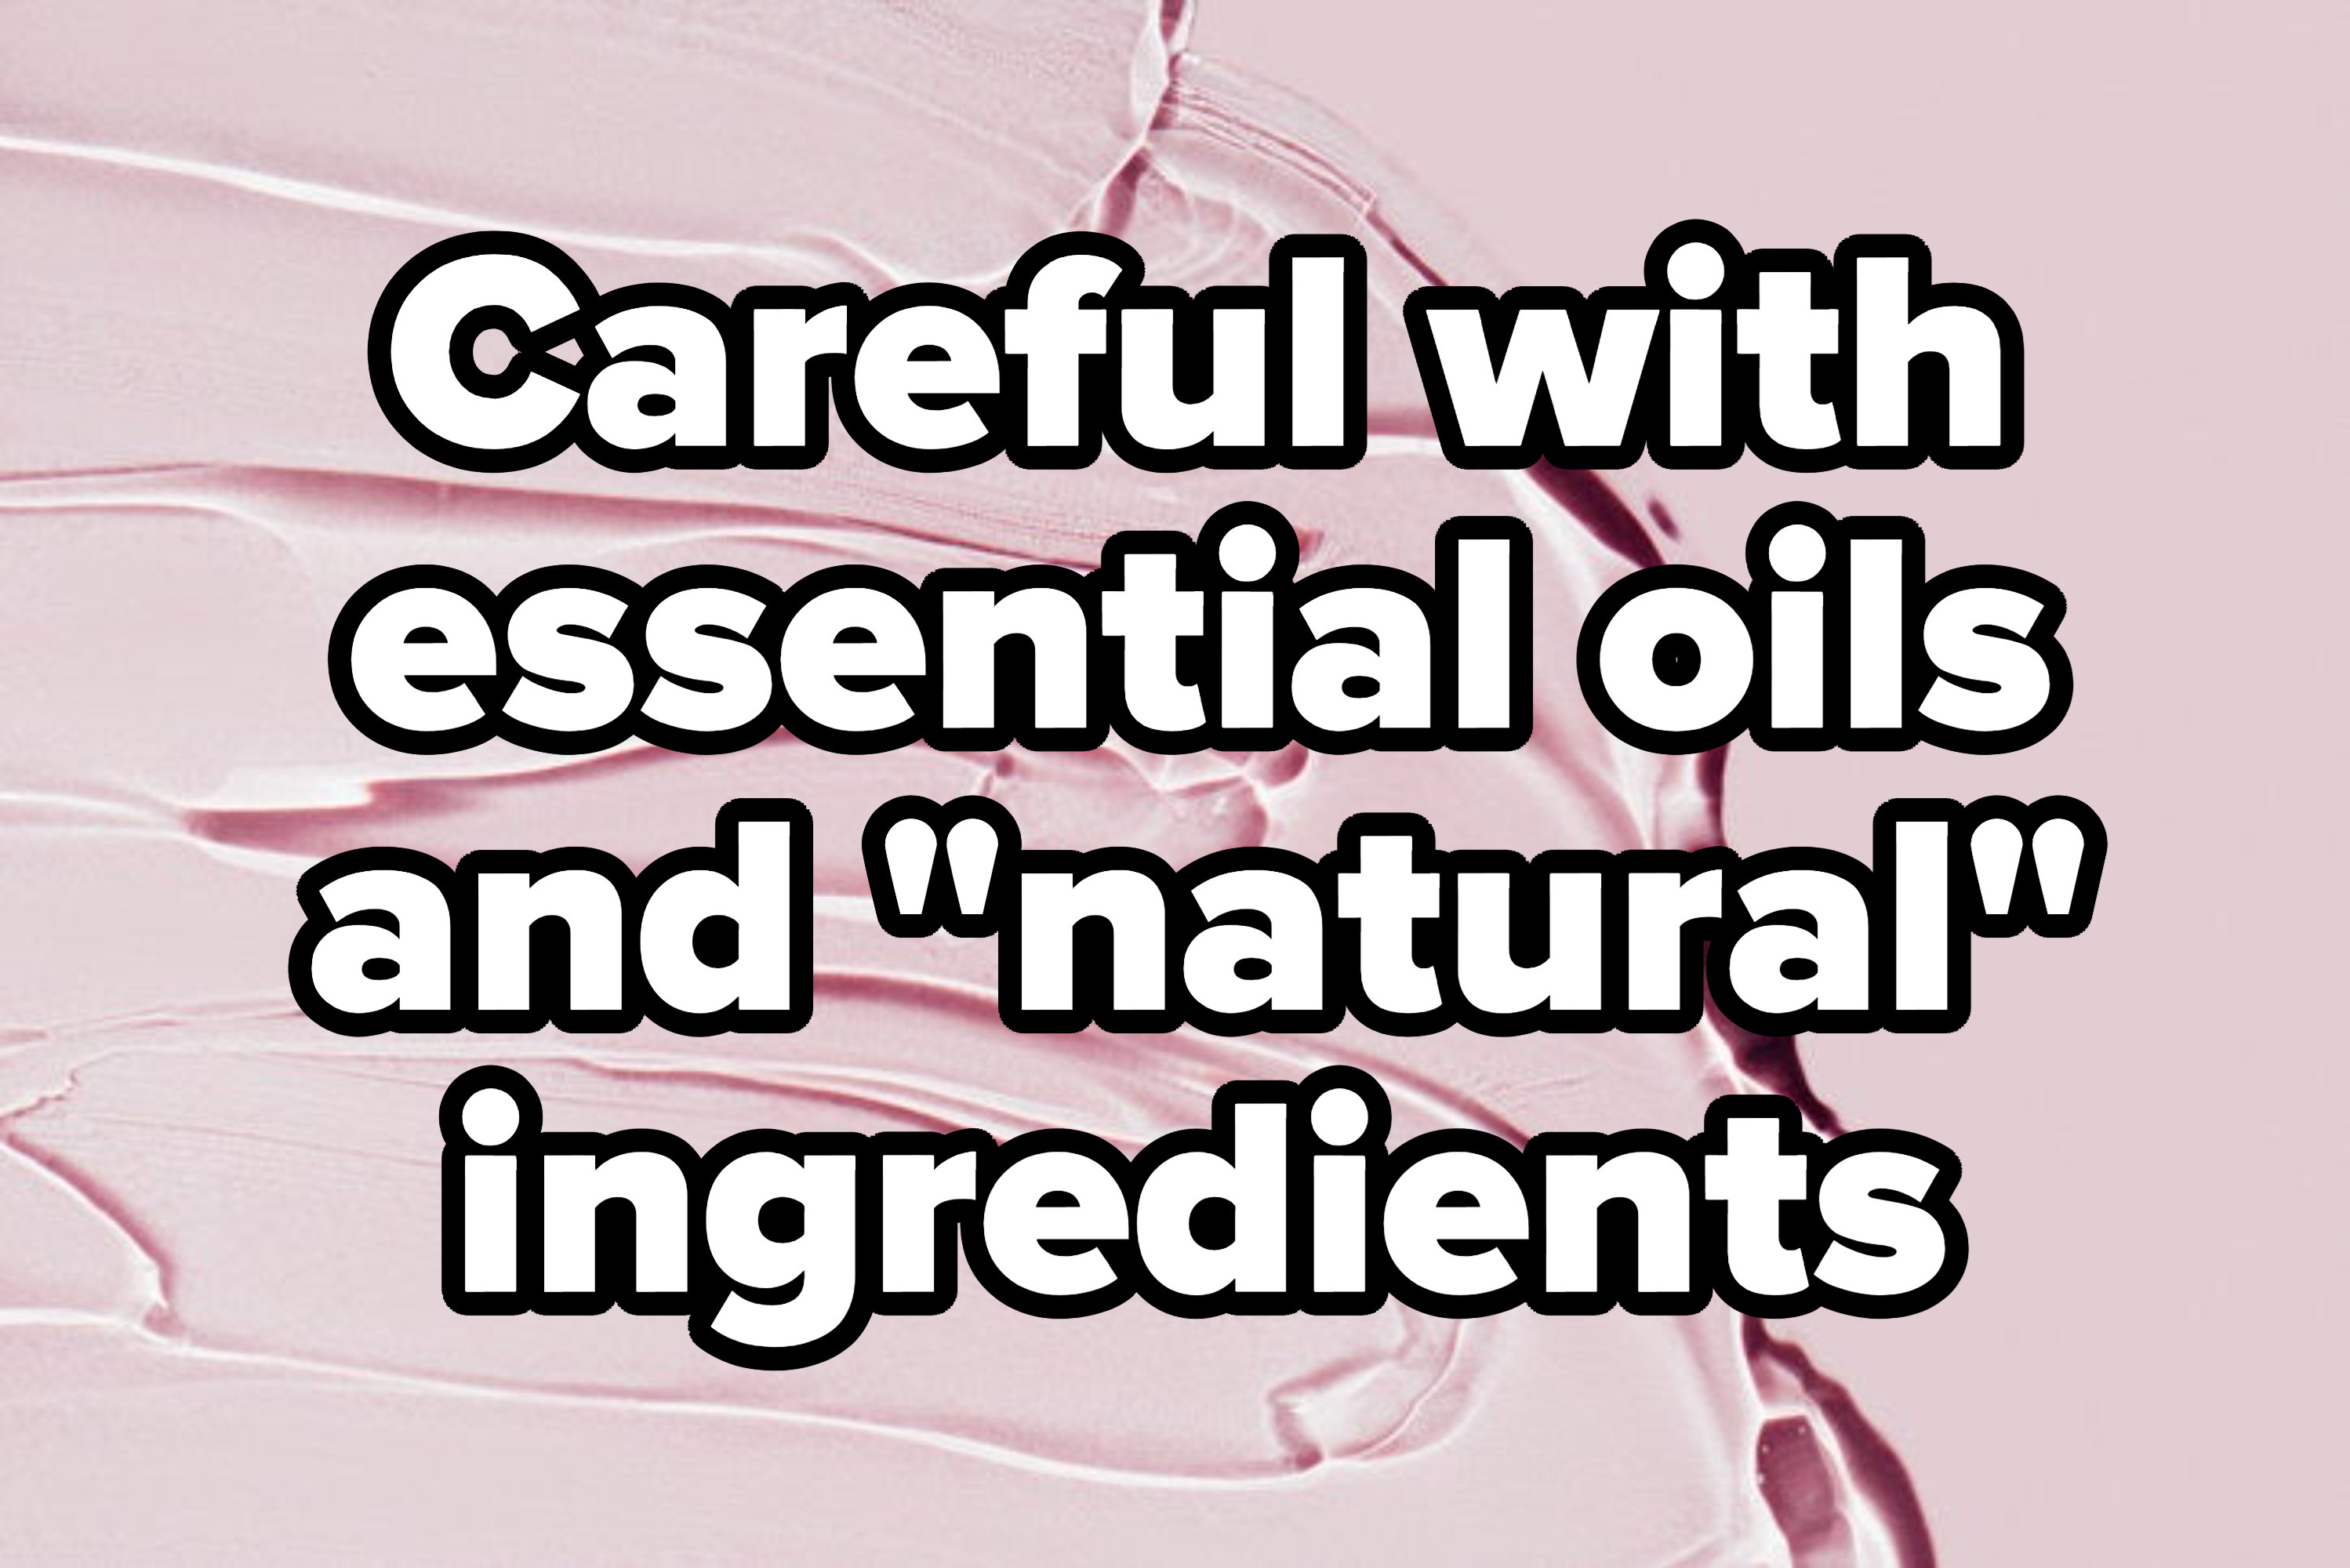 &quot;Careful with essential oils and &quot;natural&quot; ingredients&quot;